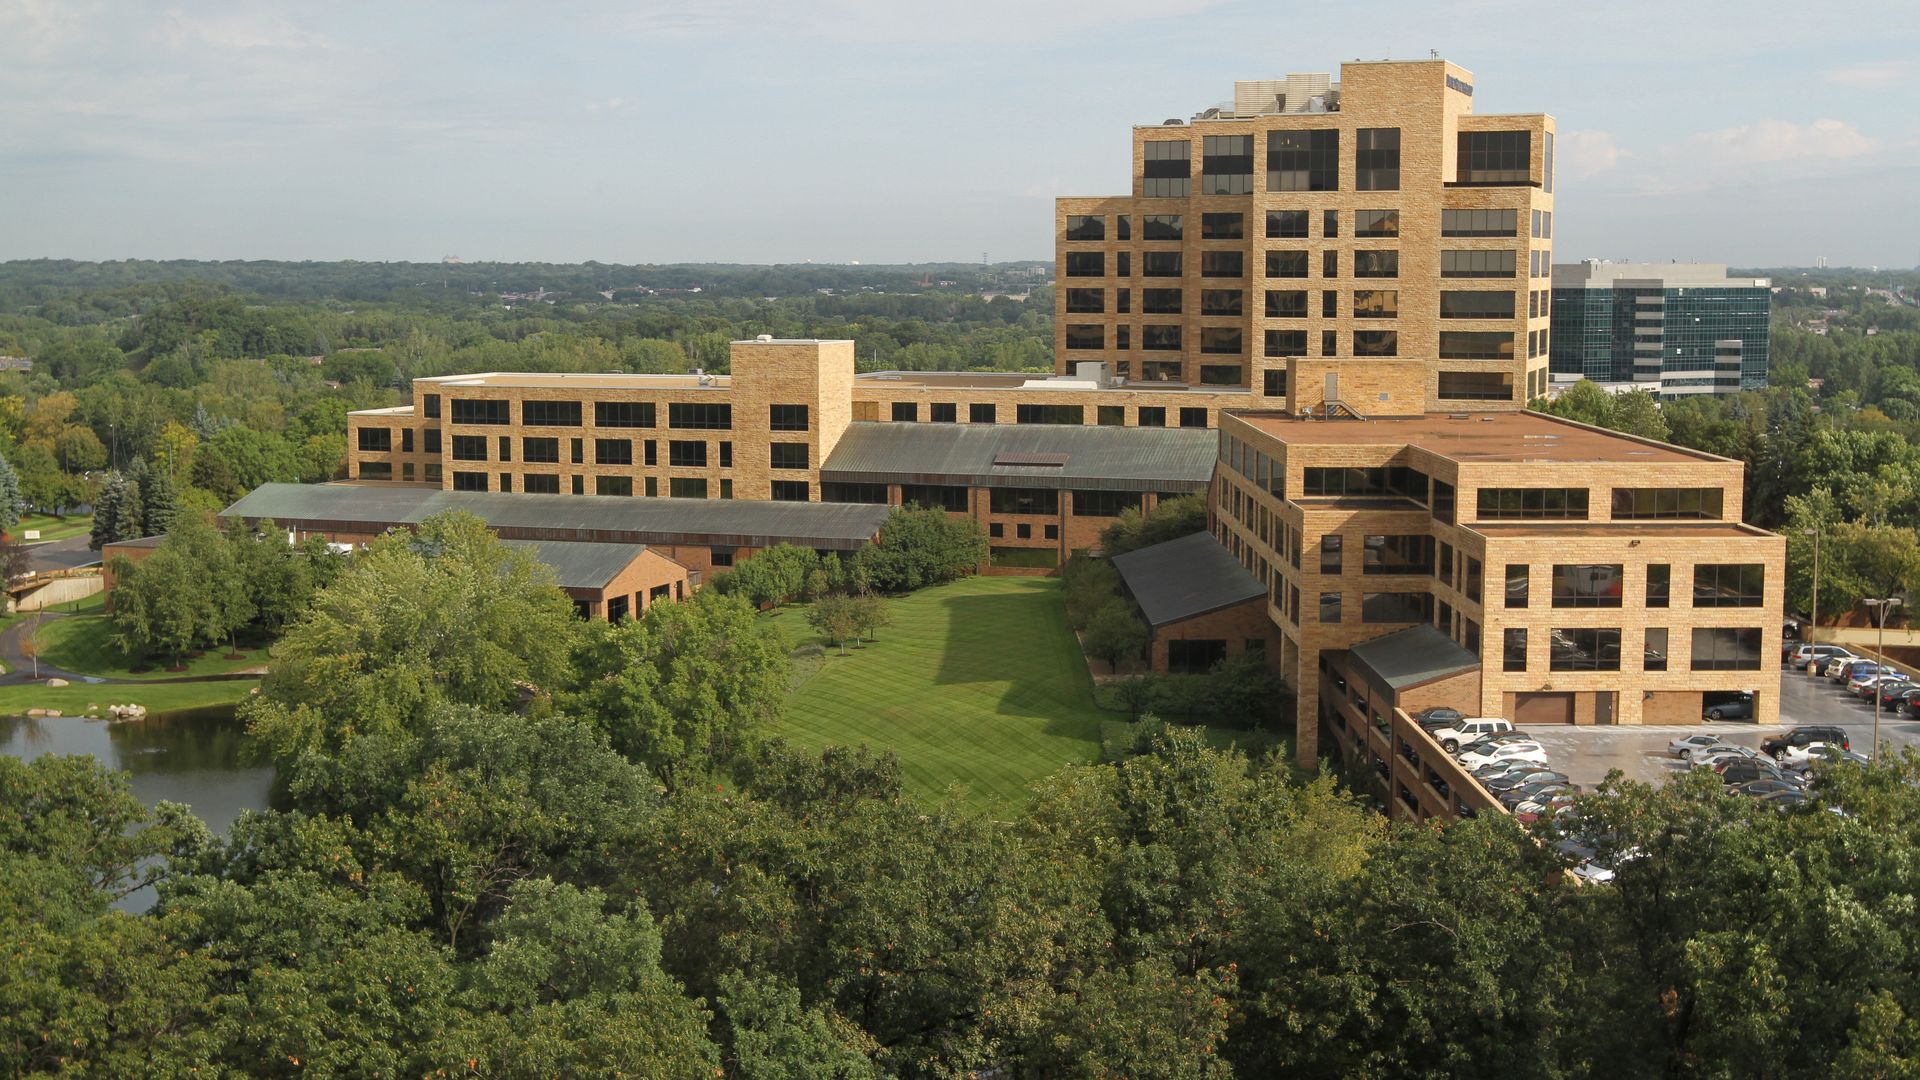 A group of buildings surrounded by trees, the UnitedHealth Group headquarters.